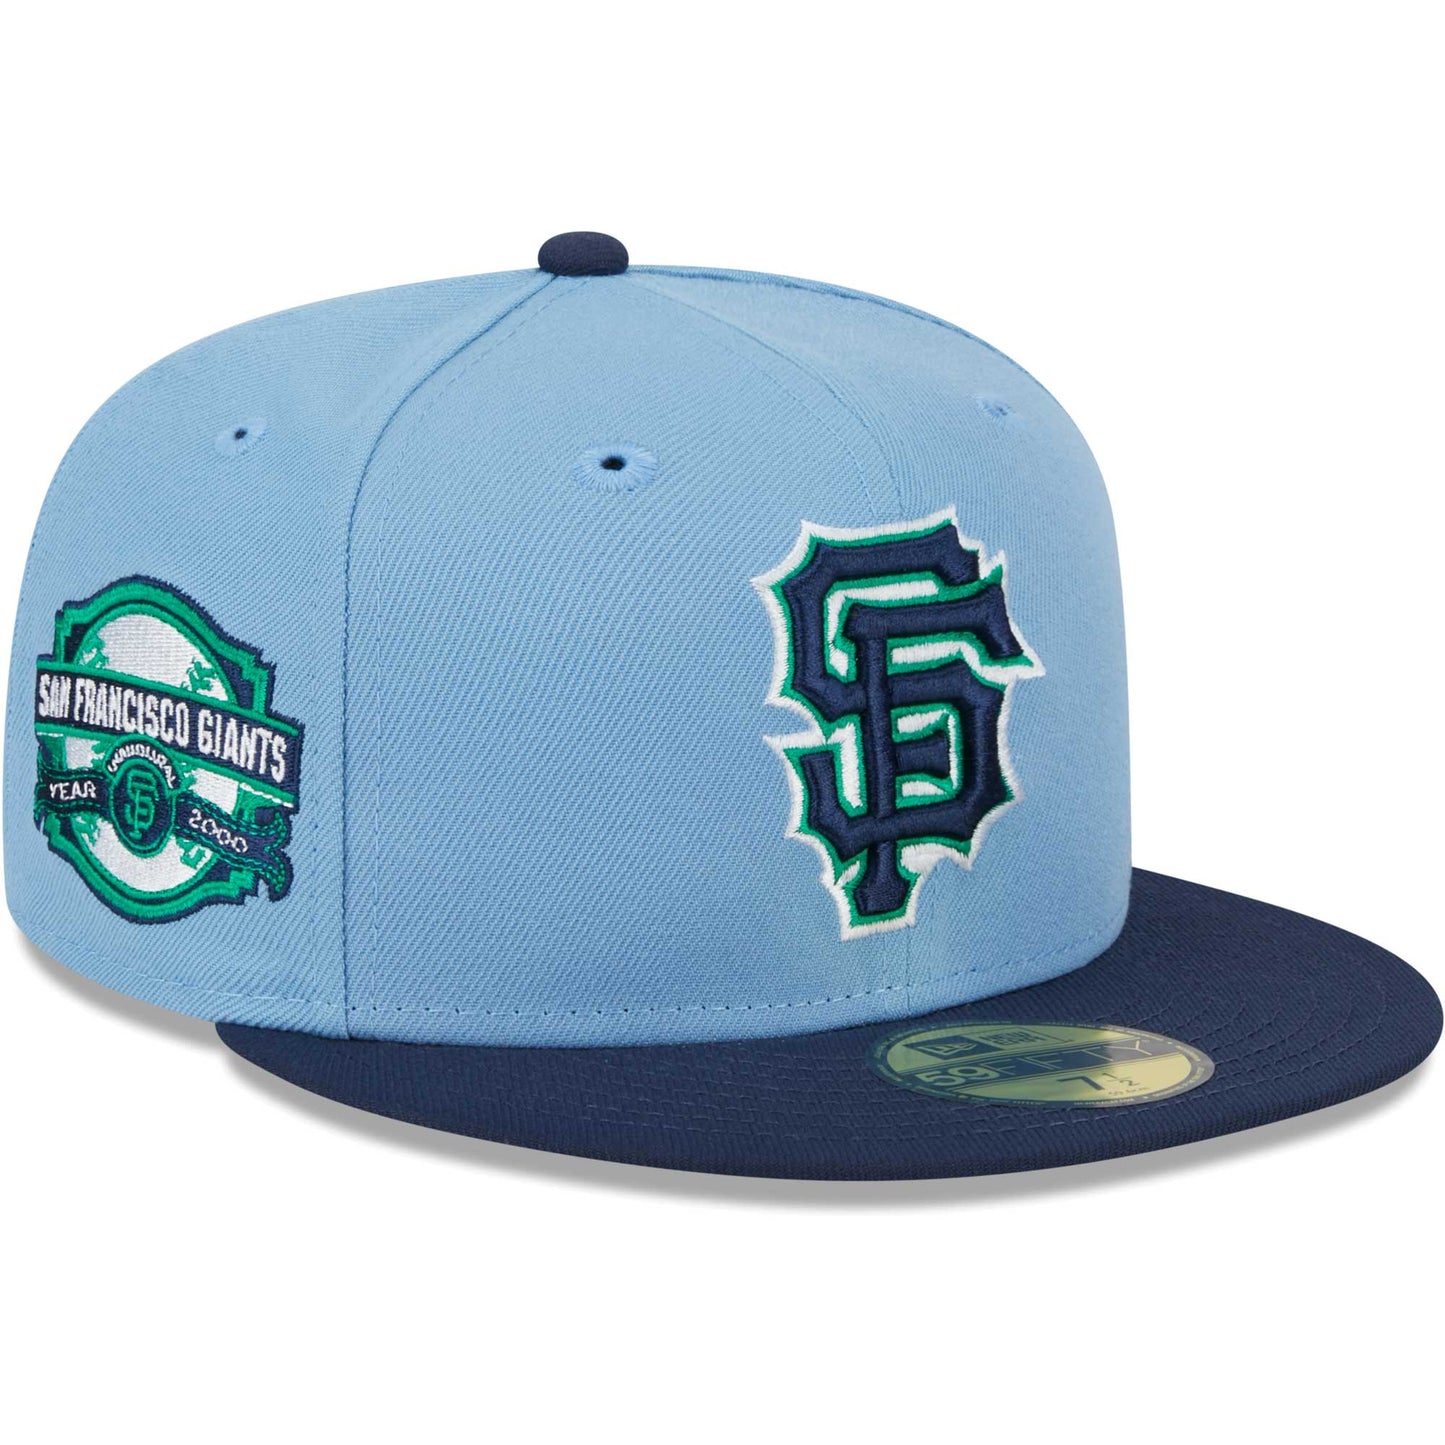 San Francisco Giants New Era Green Undervisor 59FIFTY Fitted Hat - Light Blue/Navy